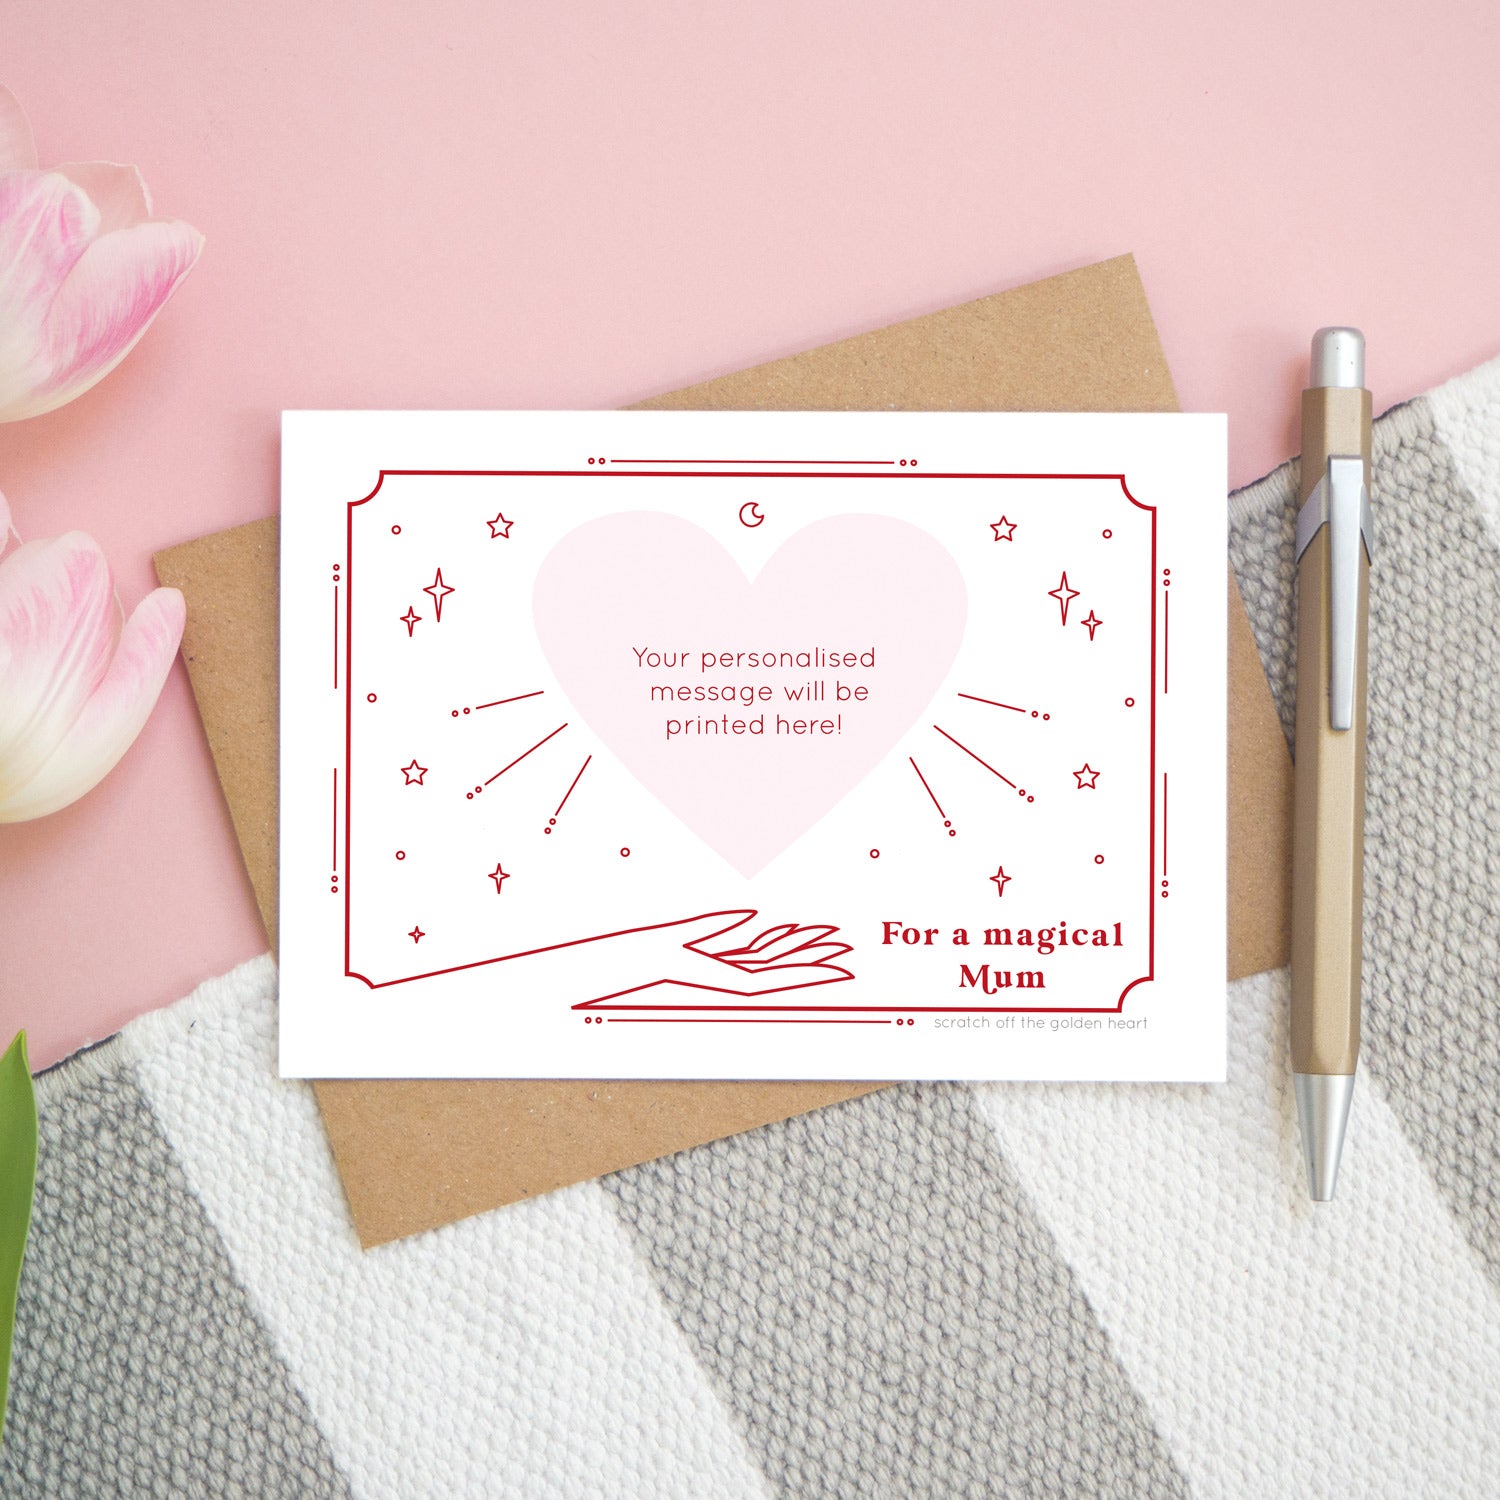 A personalised 'magical mum' scratch card showing how the card will look once all of the gold heart has been removed. The card is shot from above on a pink, white and grey background with a pen for scale.